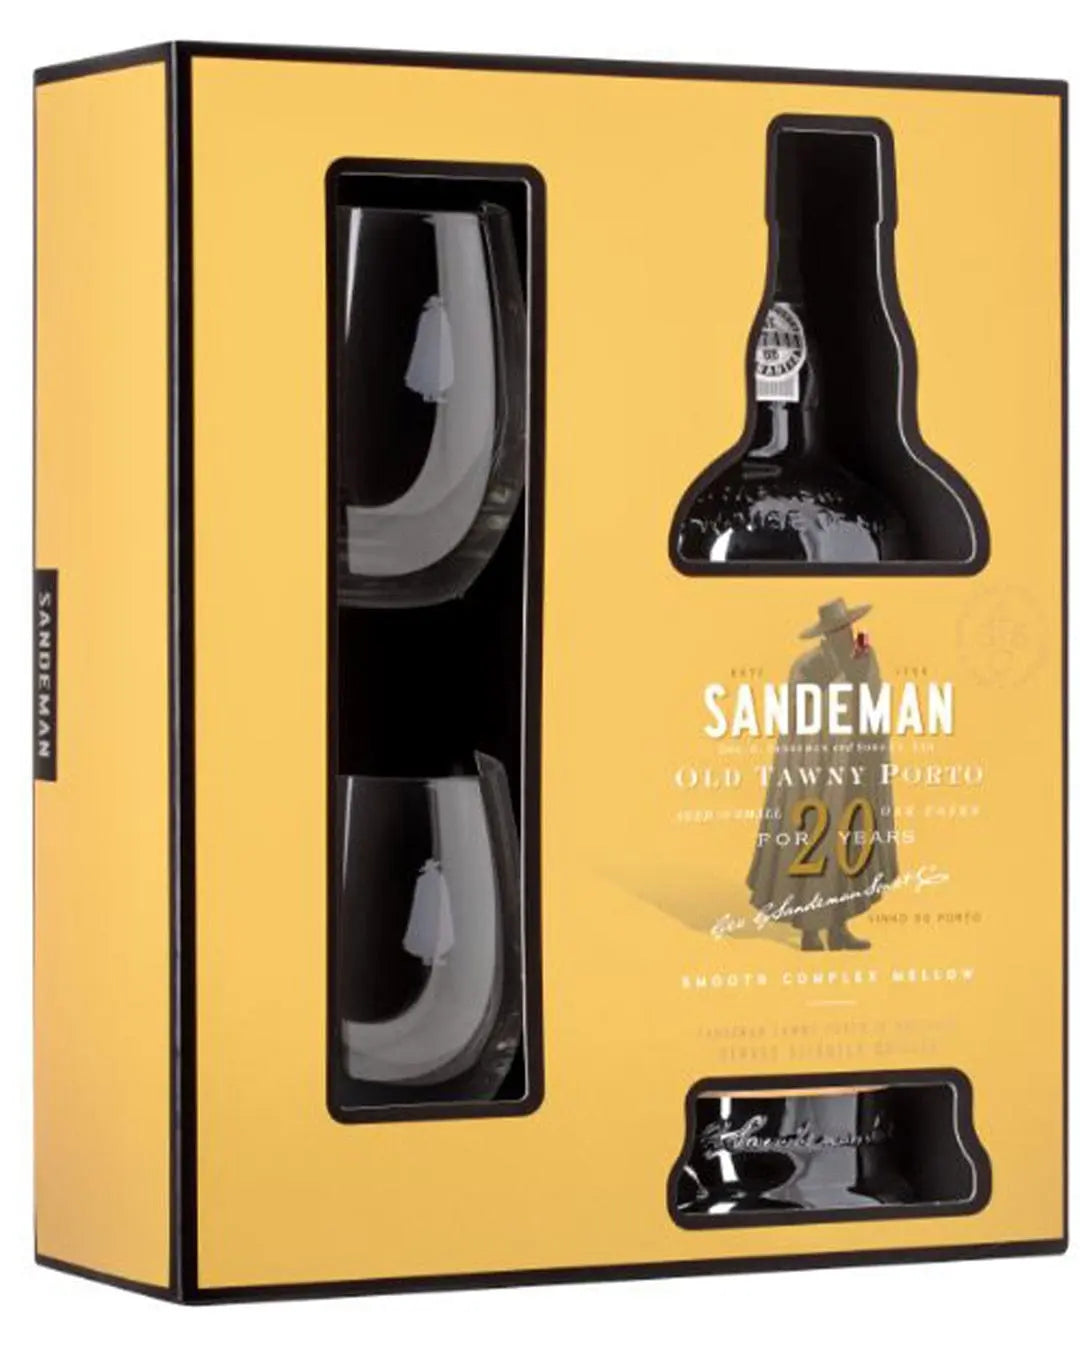 Sandemans 20 year old Tawny Port & 2 Glasses, 75 cl Fortified & Other Wines 5601083001639